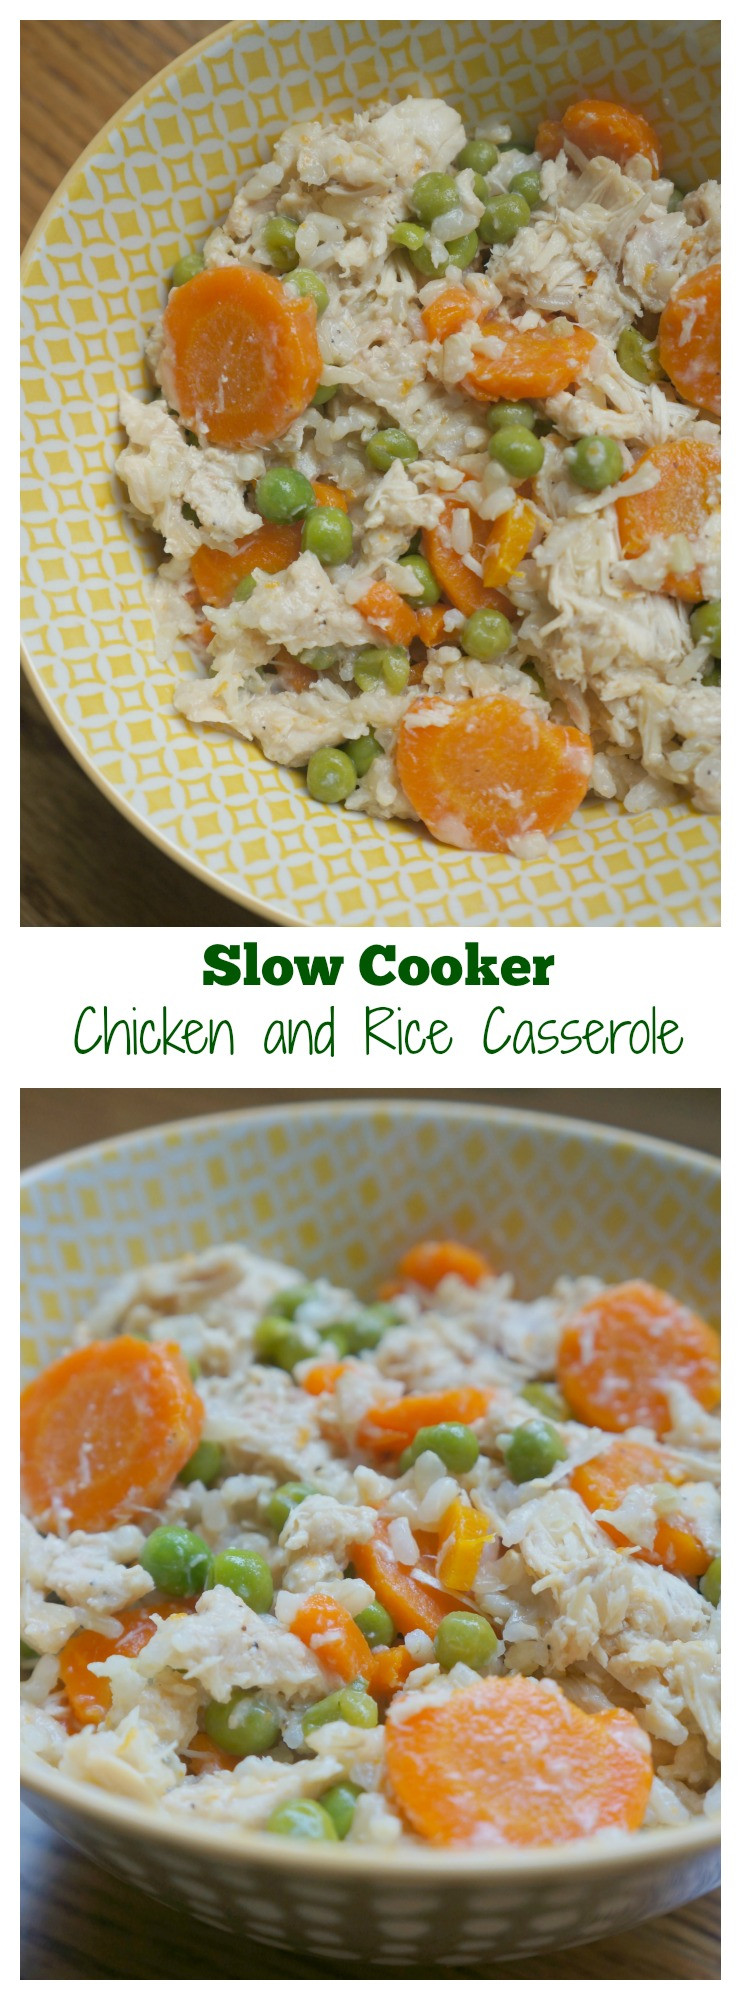 Slow Cooker Chicken And Rice Casserole
 Slow Cooker Chicken and Rice Casserole Fueling a Fit Fam